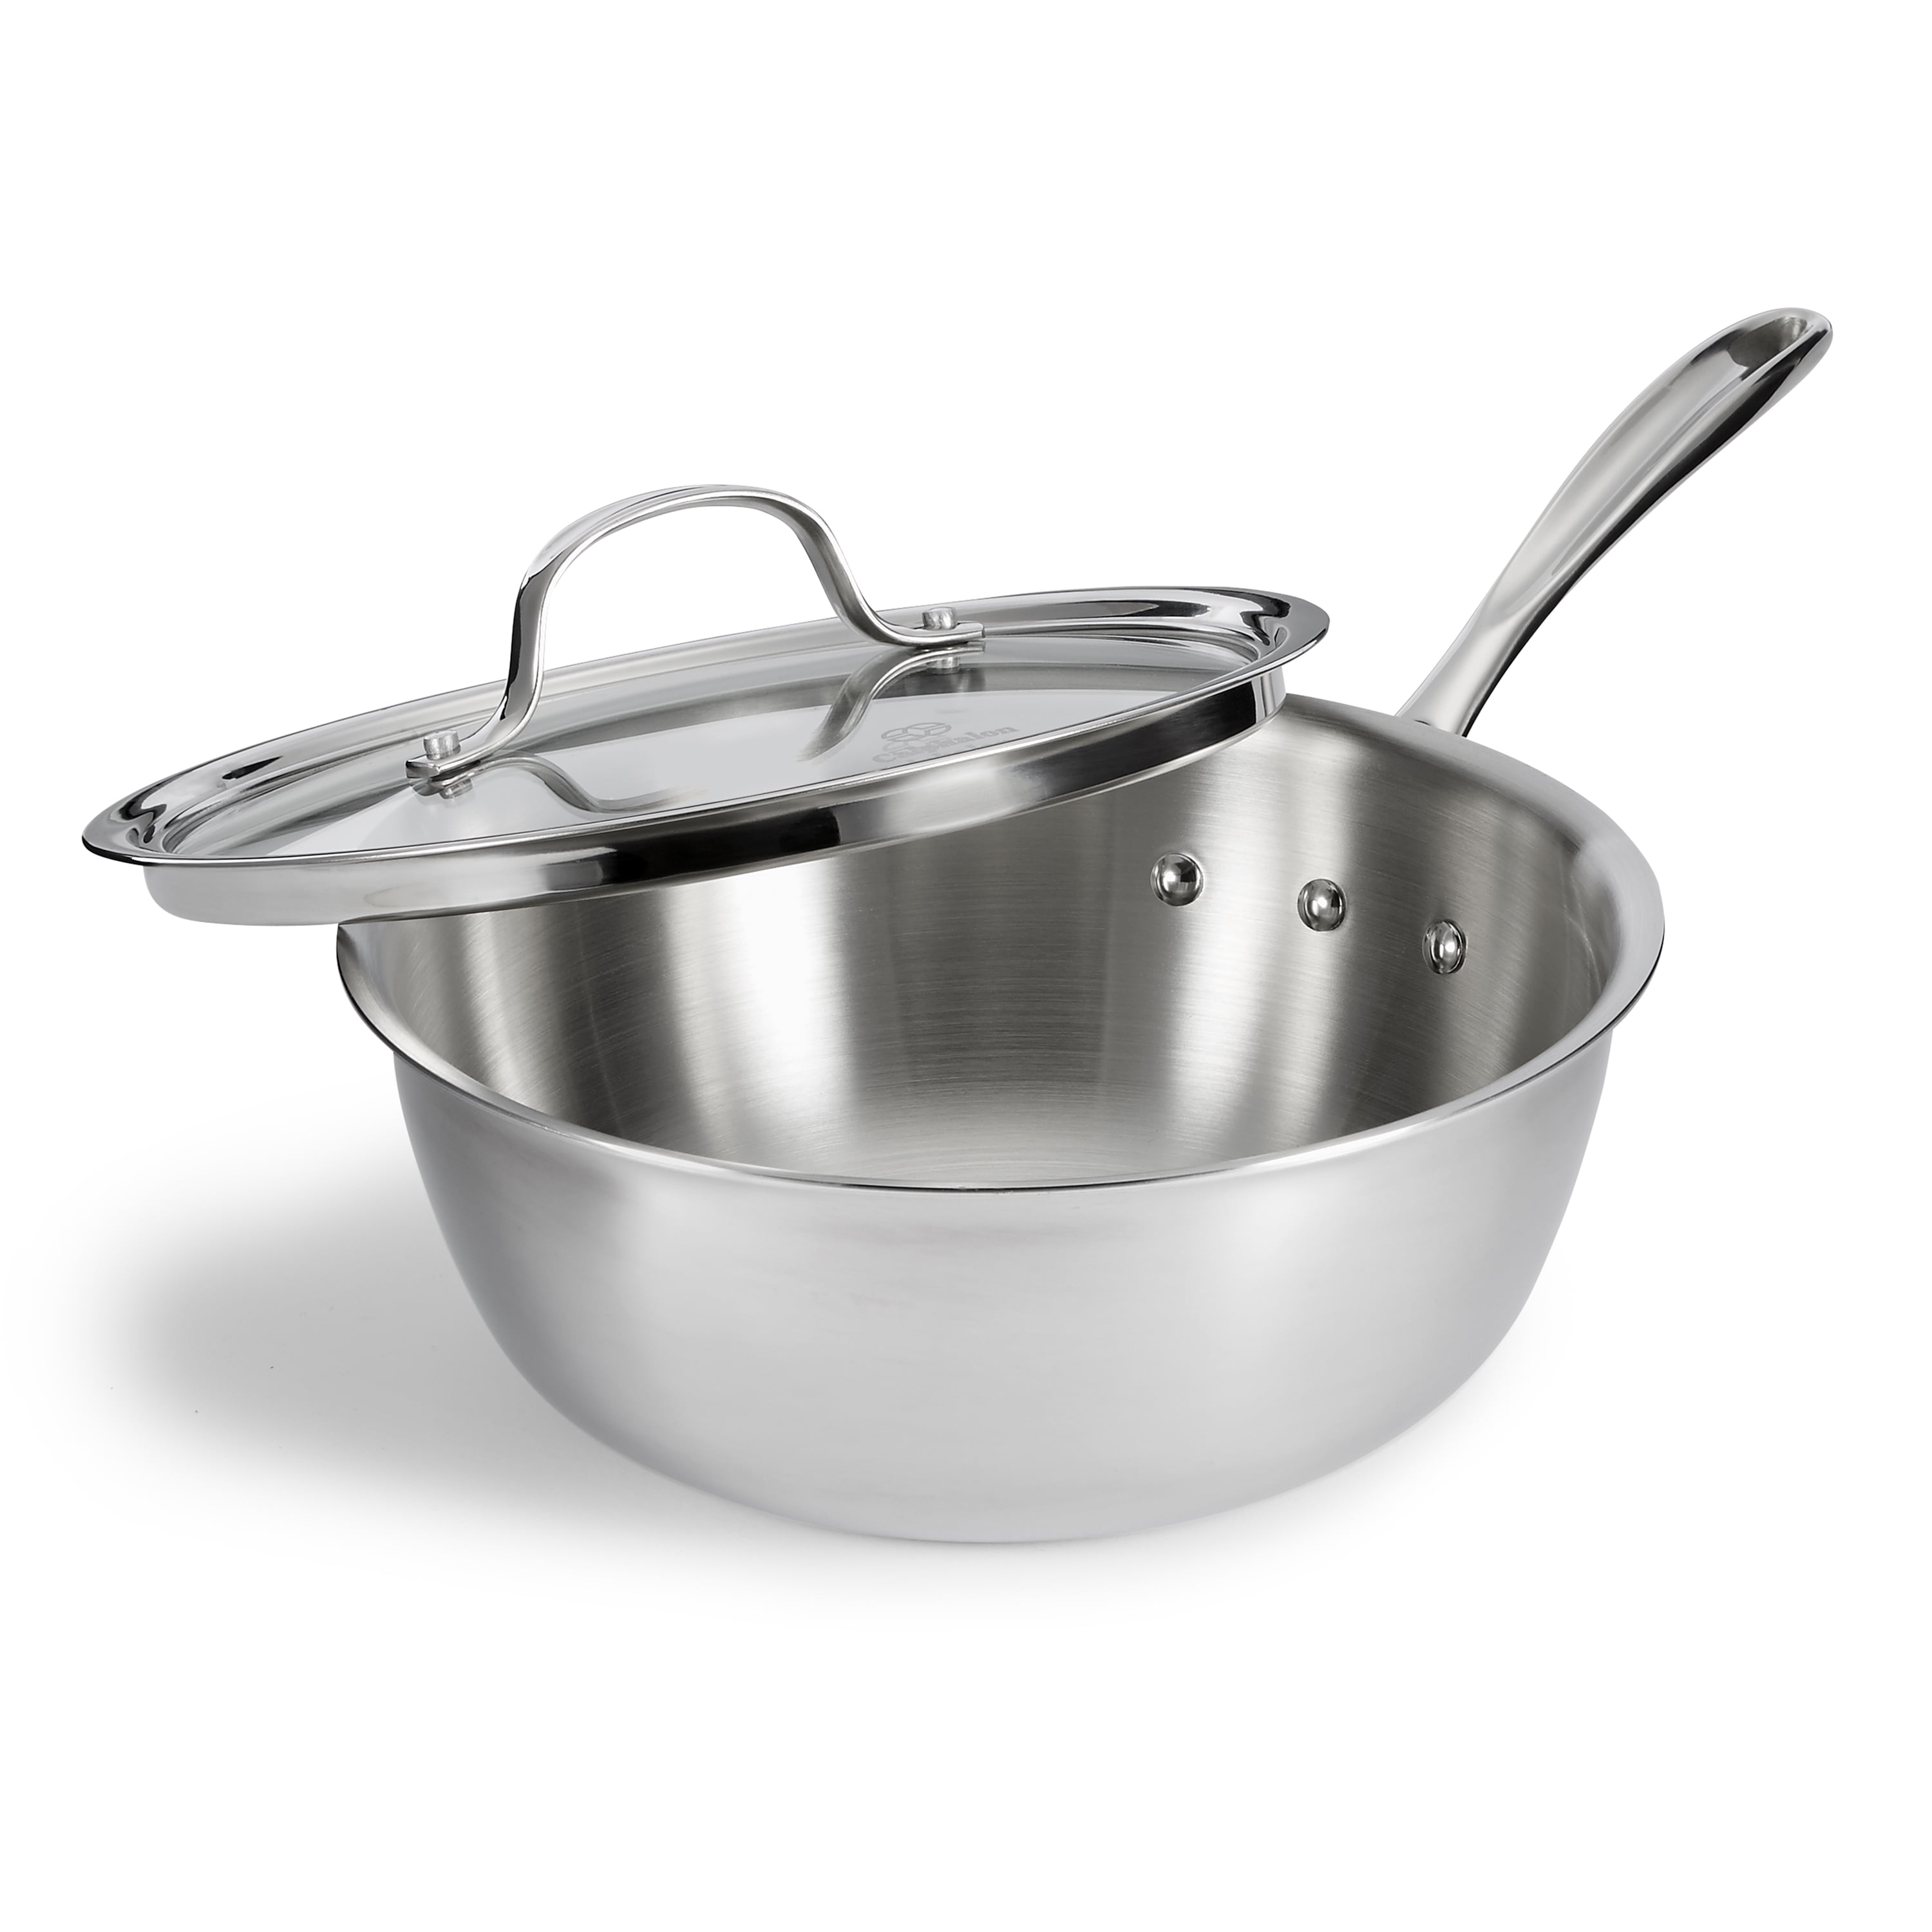 Calphalon Tri-Ply Stainless Steel 3-Quart Saute Pan with Cover: Saute Pans:  Home & Kitchen 